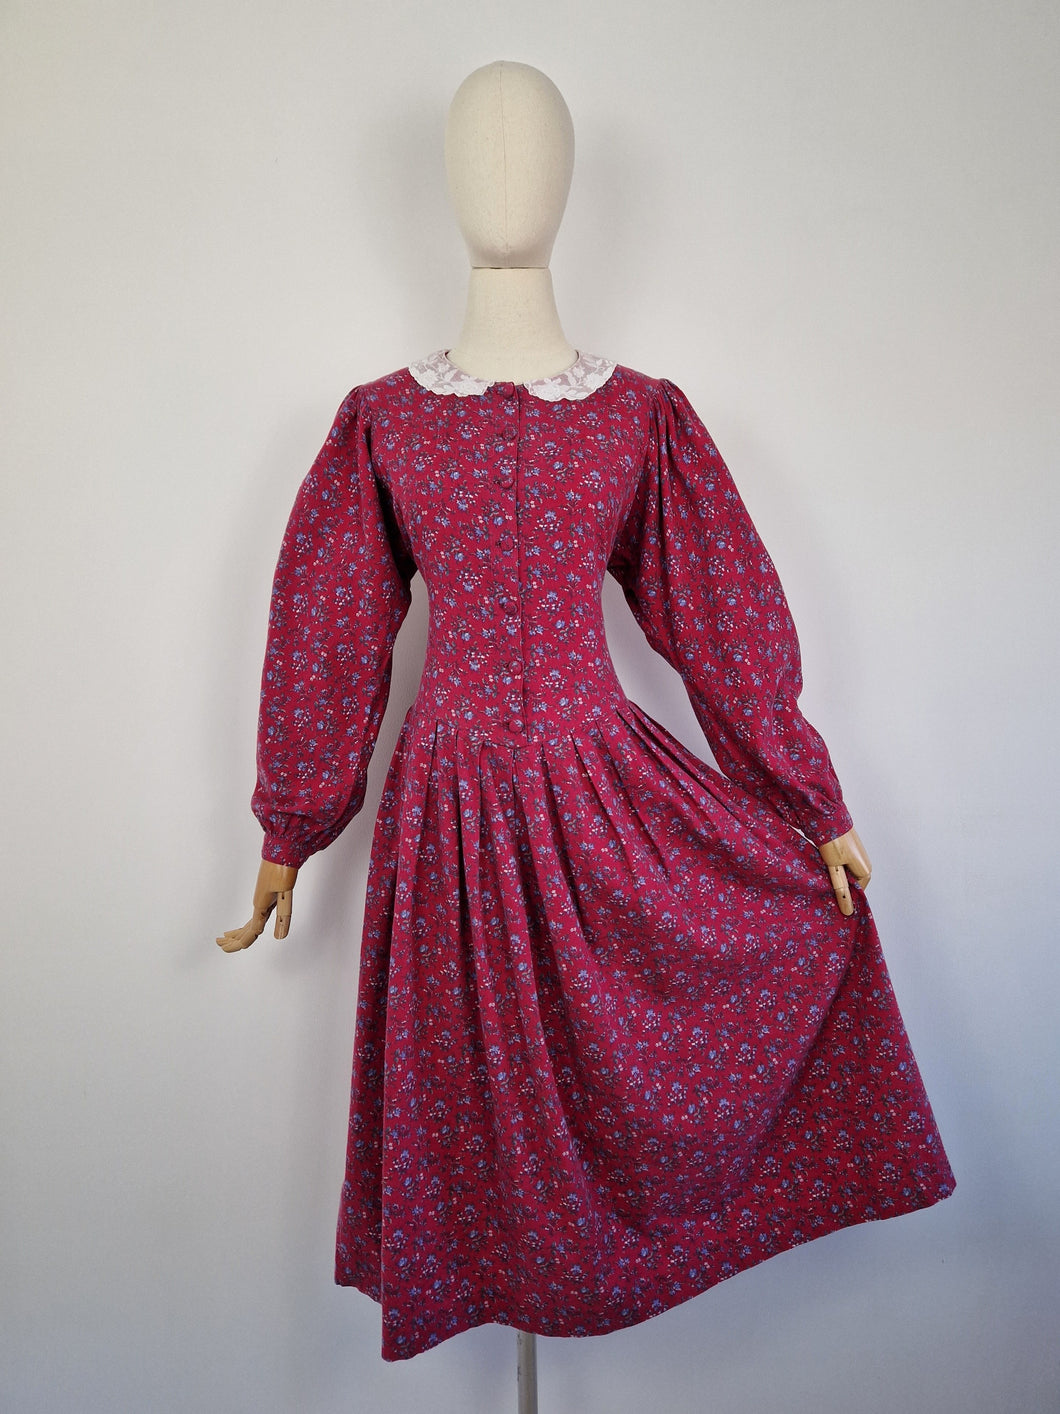 Vintage 80s Laura Ashley red dress